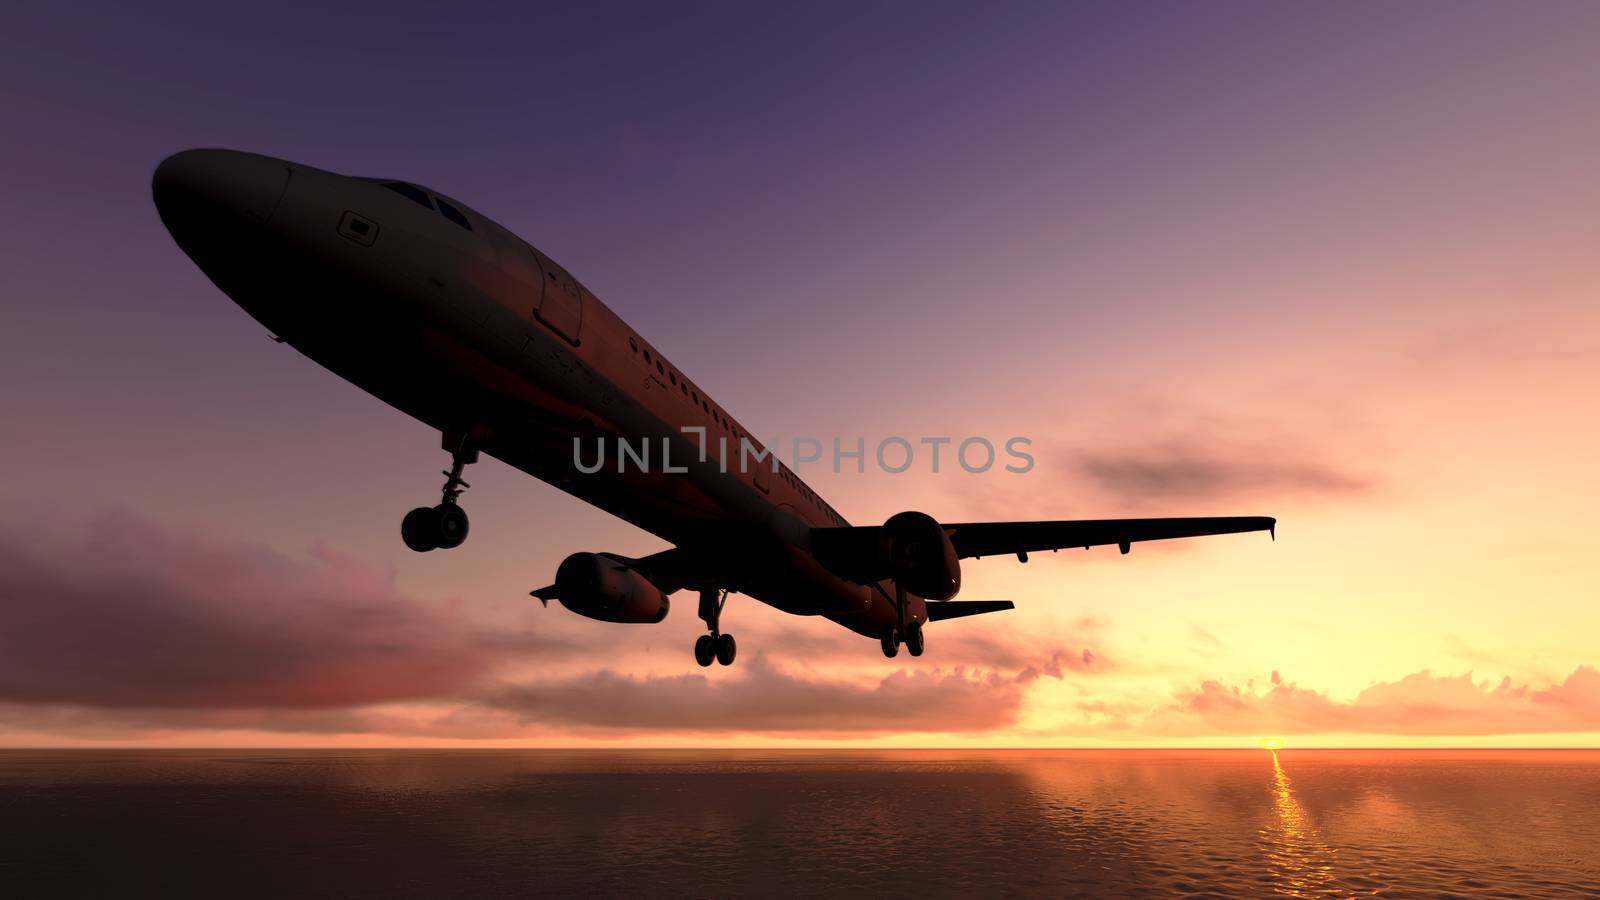 Plane over the ocean. by apichart